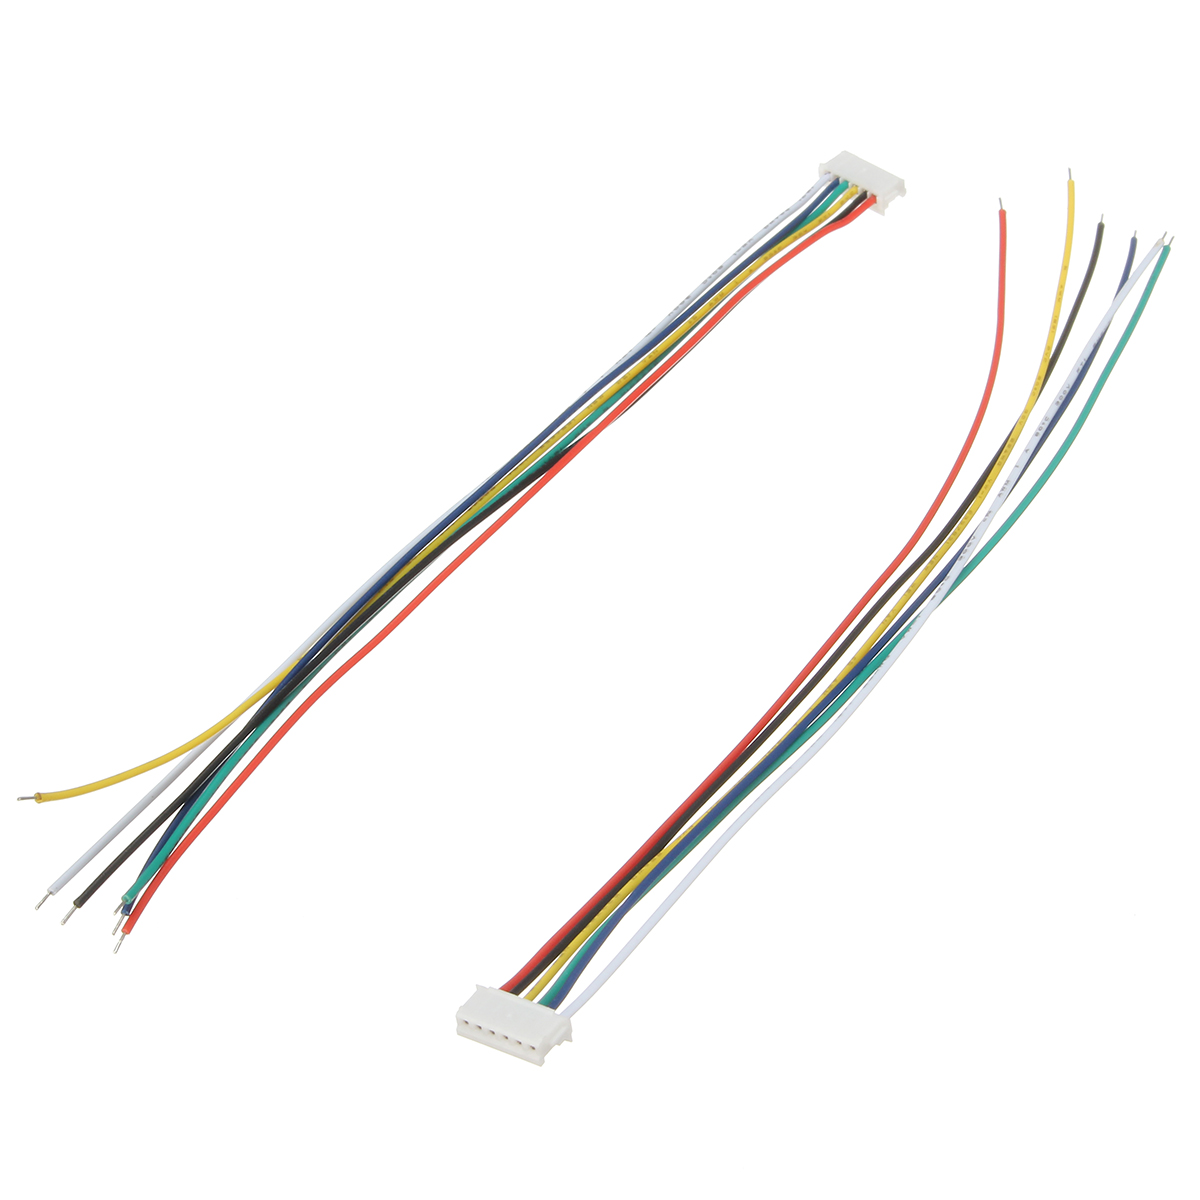 Excellwayreg-Mini-Micro-JST-15mm-ZH-6-Pin-Connector-Plug-and-Wires-Cables-15cm-10-Set-1170230-6